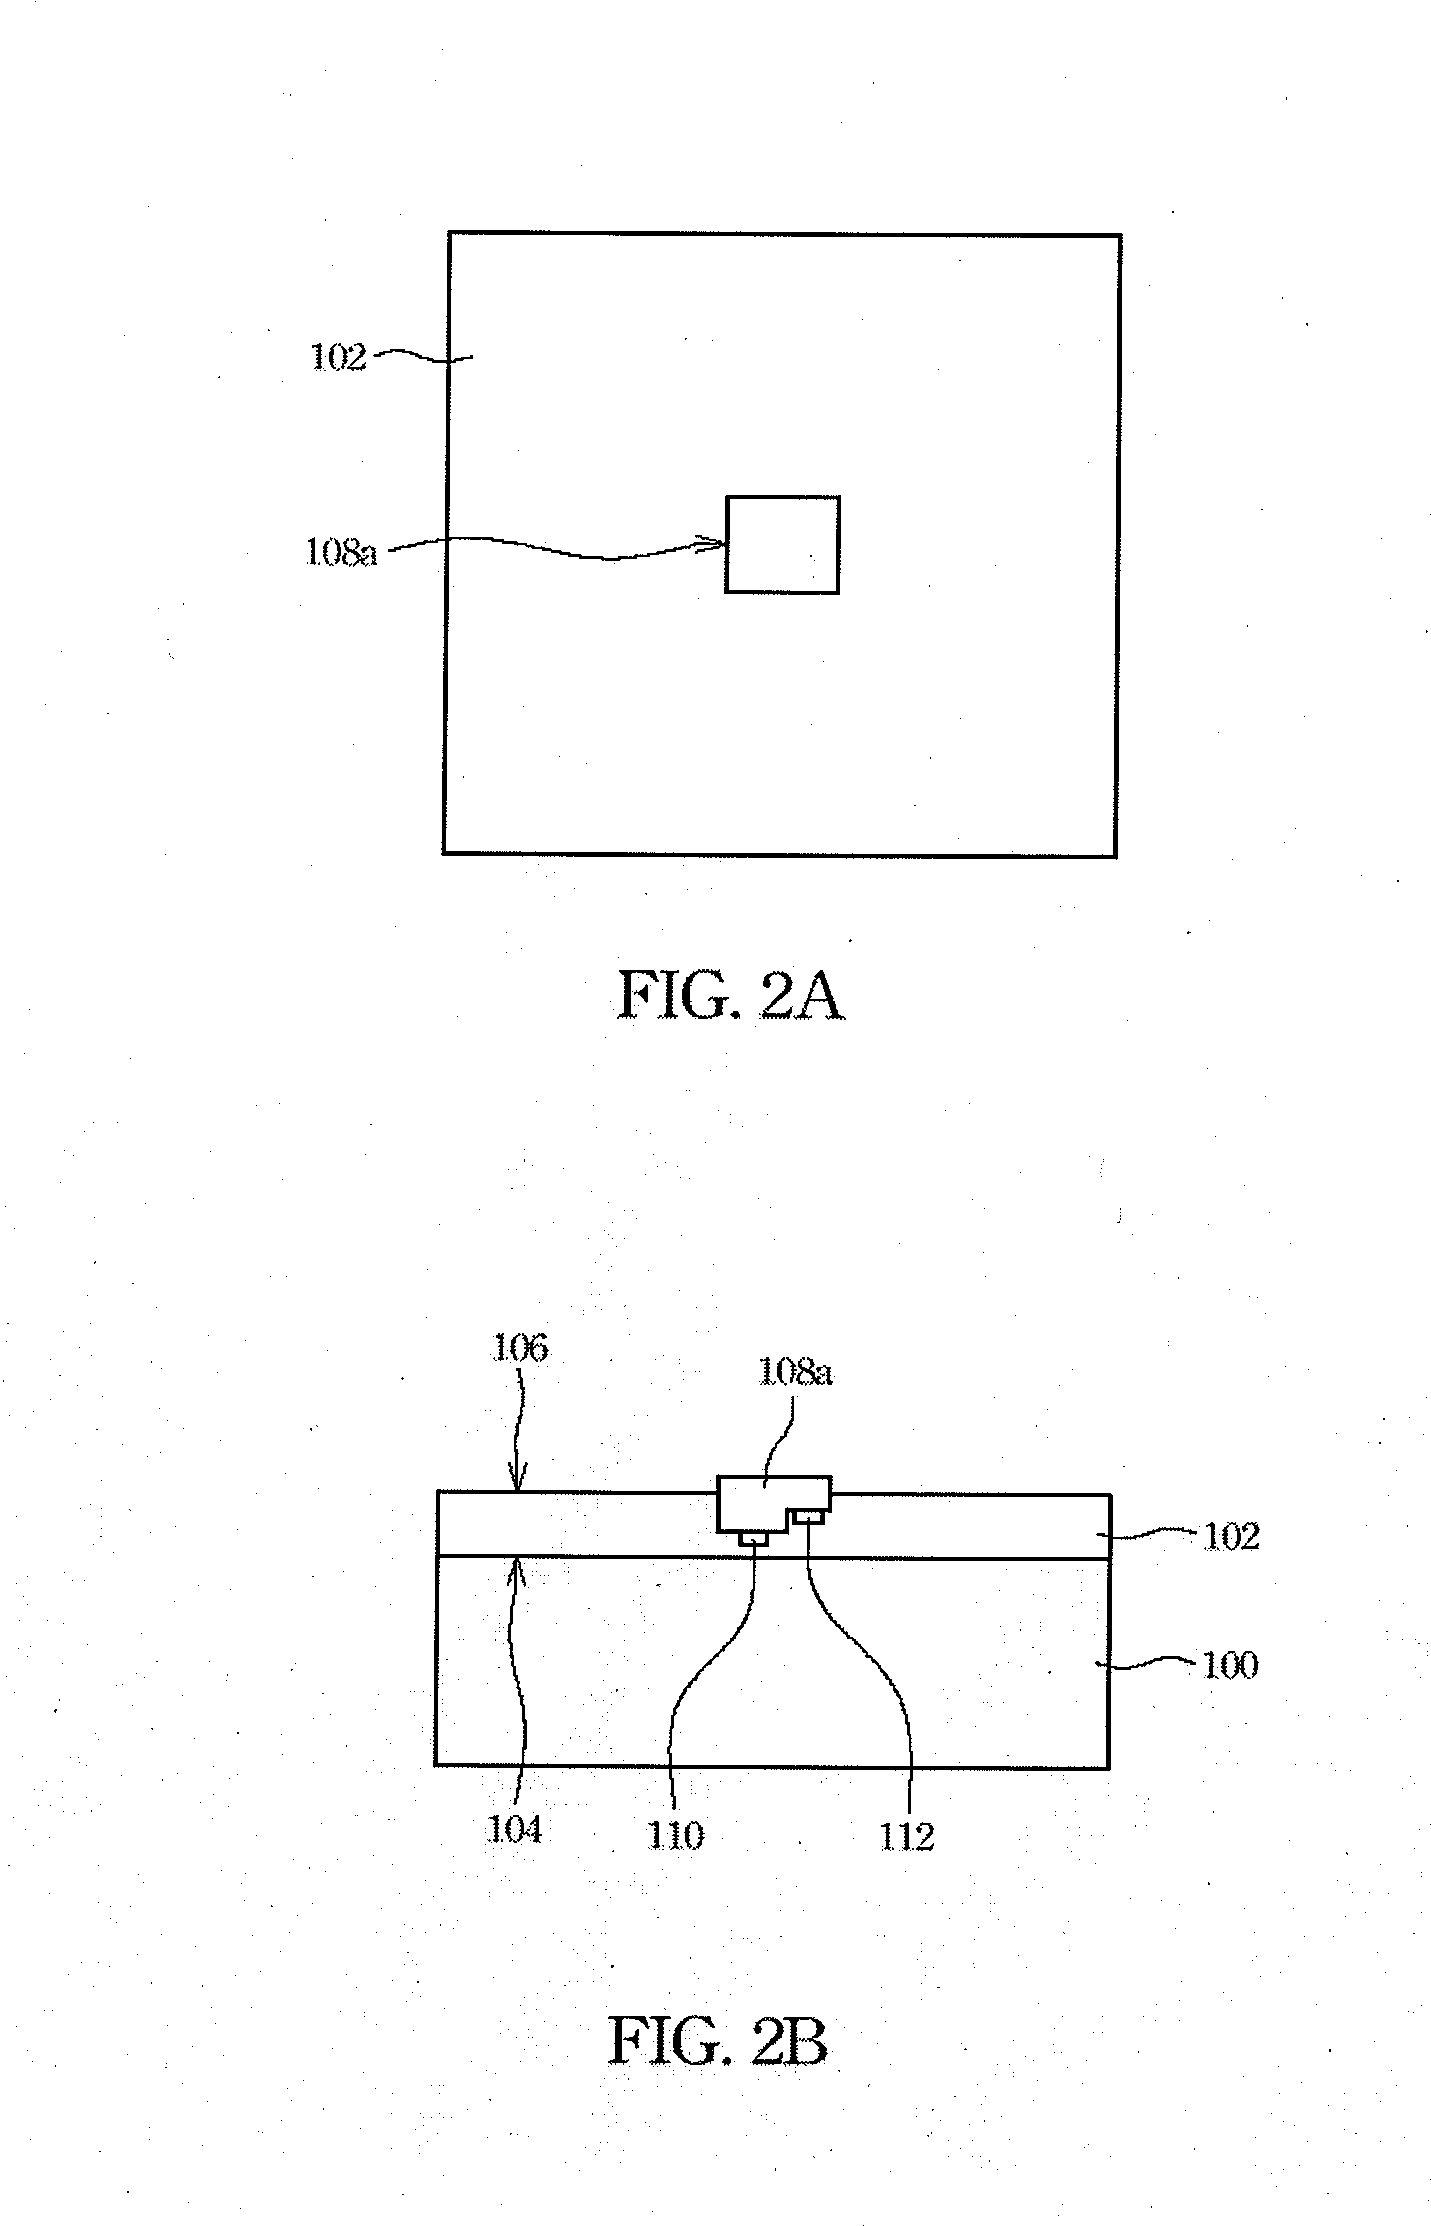 Embedded metal heat sink for semiconductor